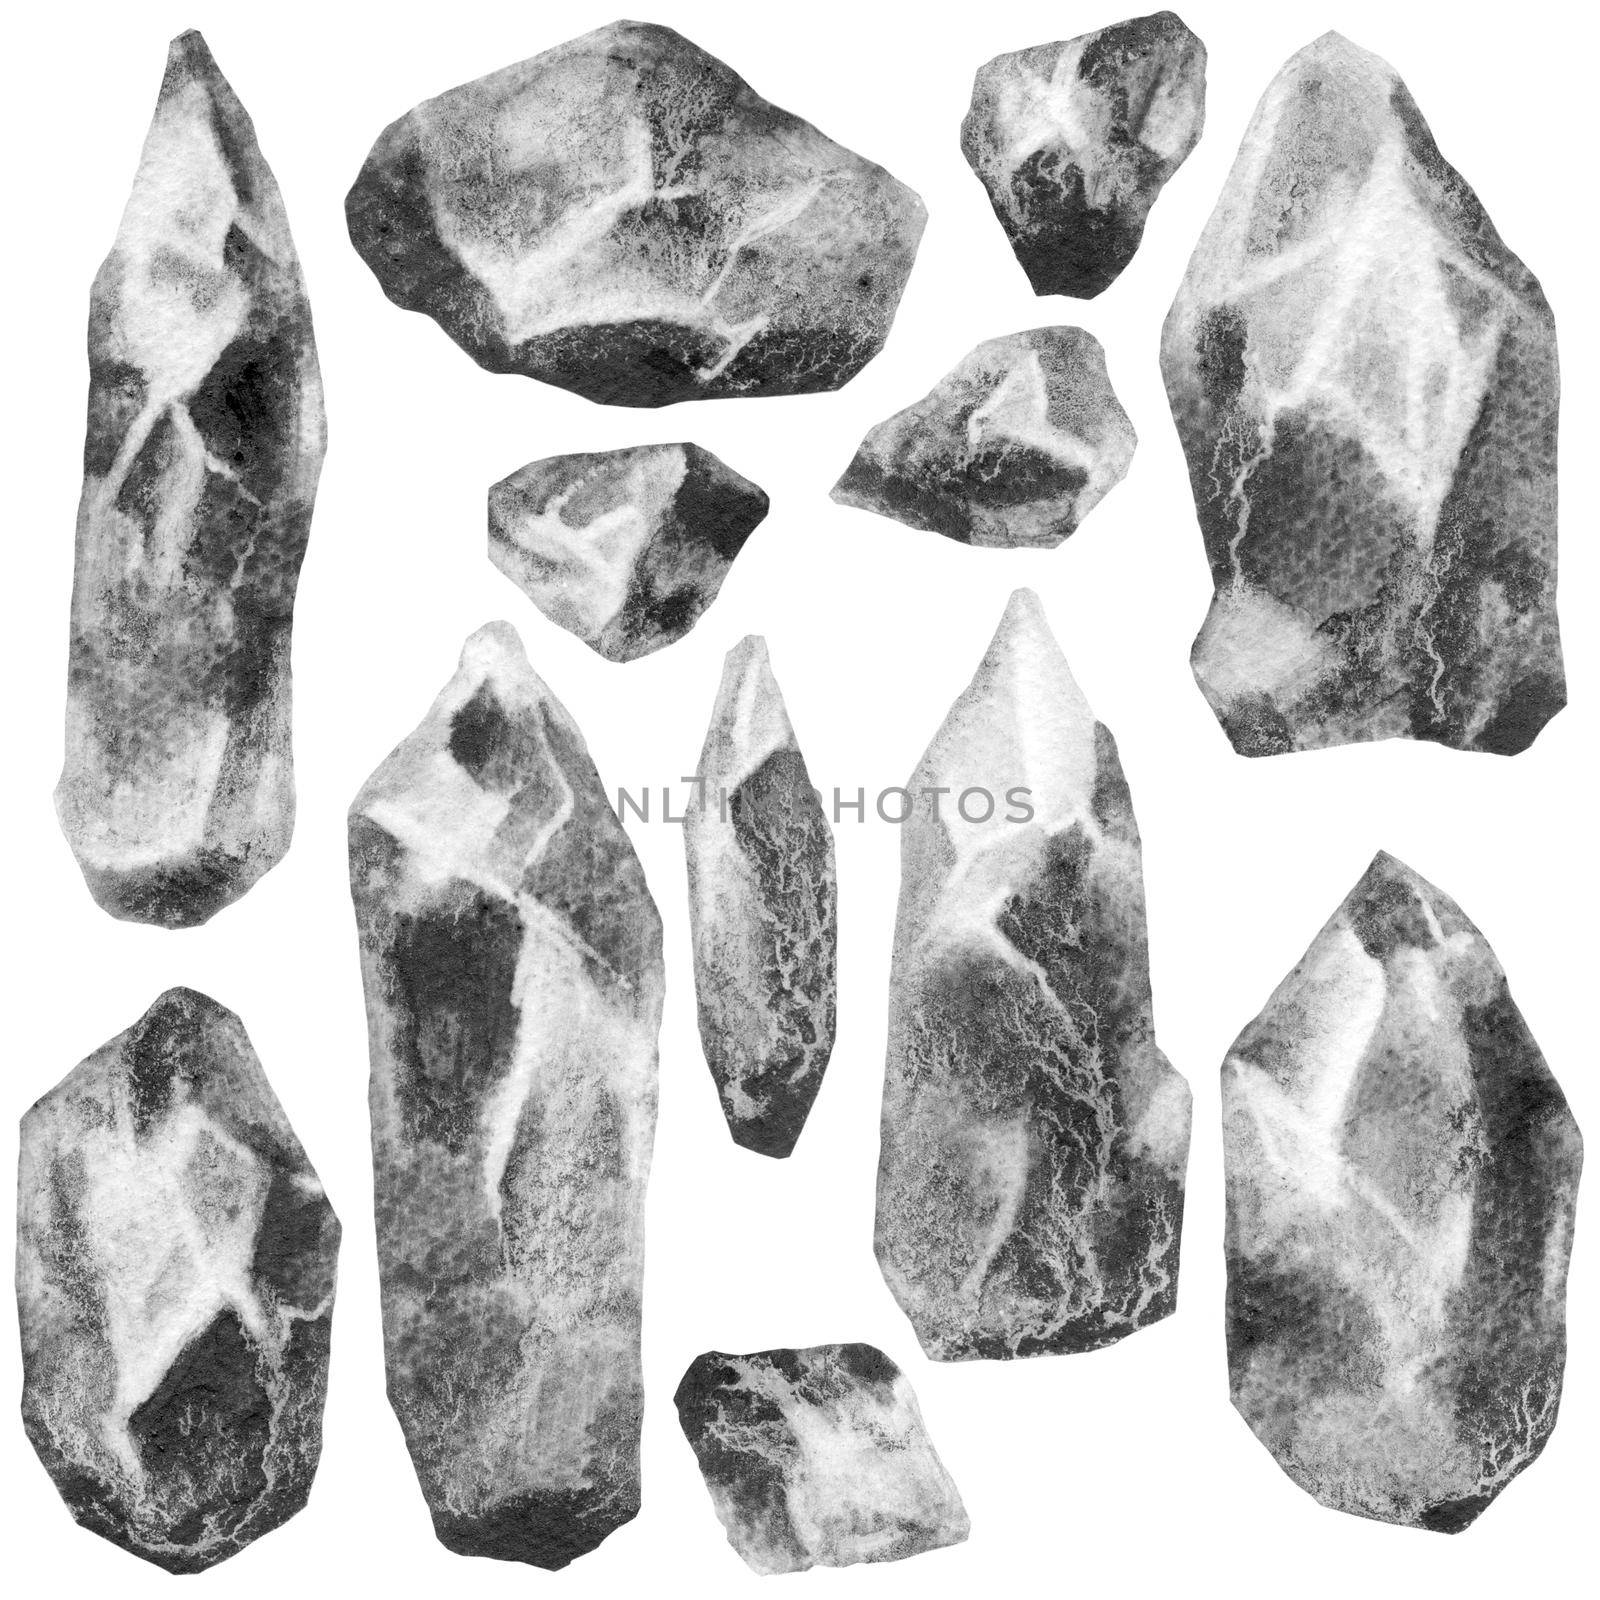 Watercolor and ink sketch - illustration of stone crystals, grunge texture objects on white background